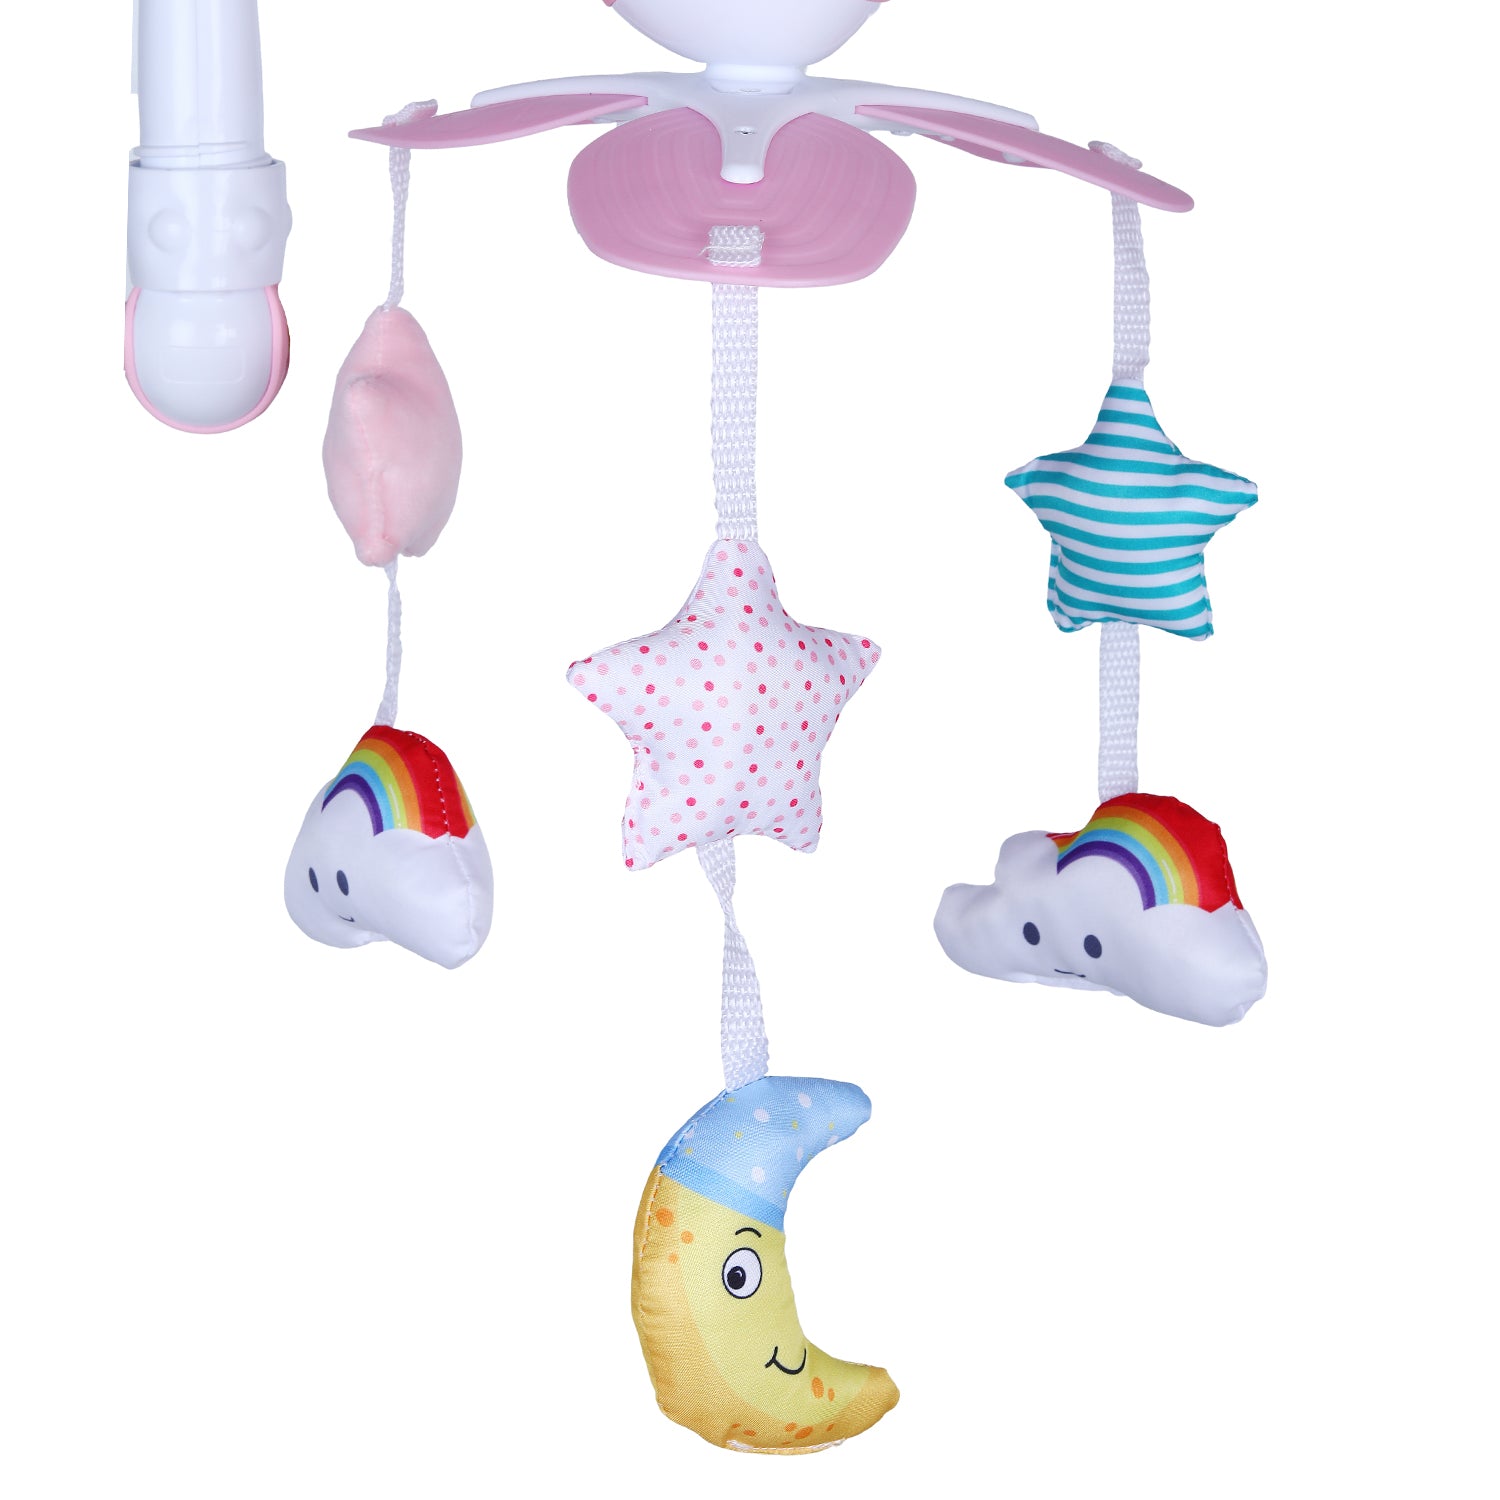 Sleepy Star Premium Electric Musical Bed Cot Mobile With Hanging Rattles - Pink - Baby Moo